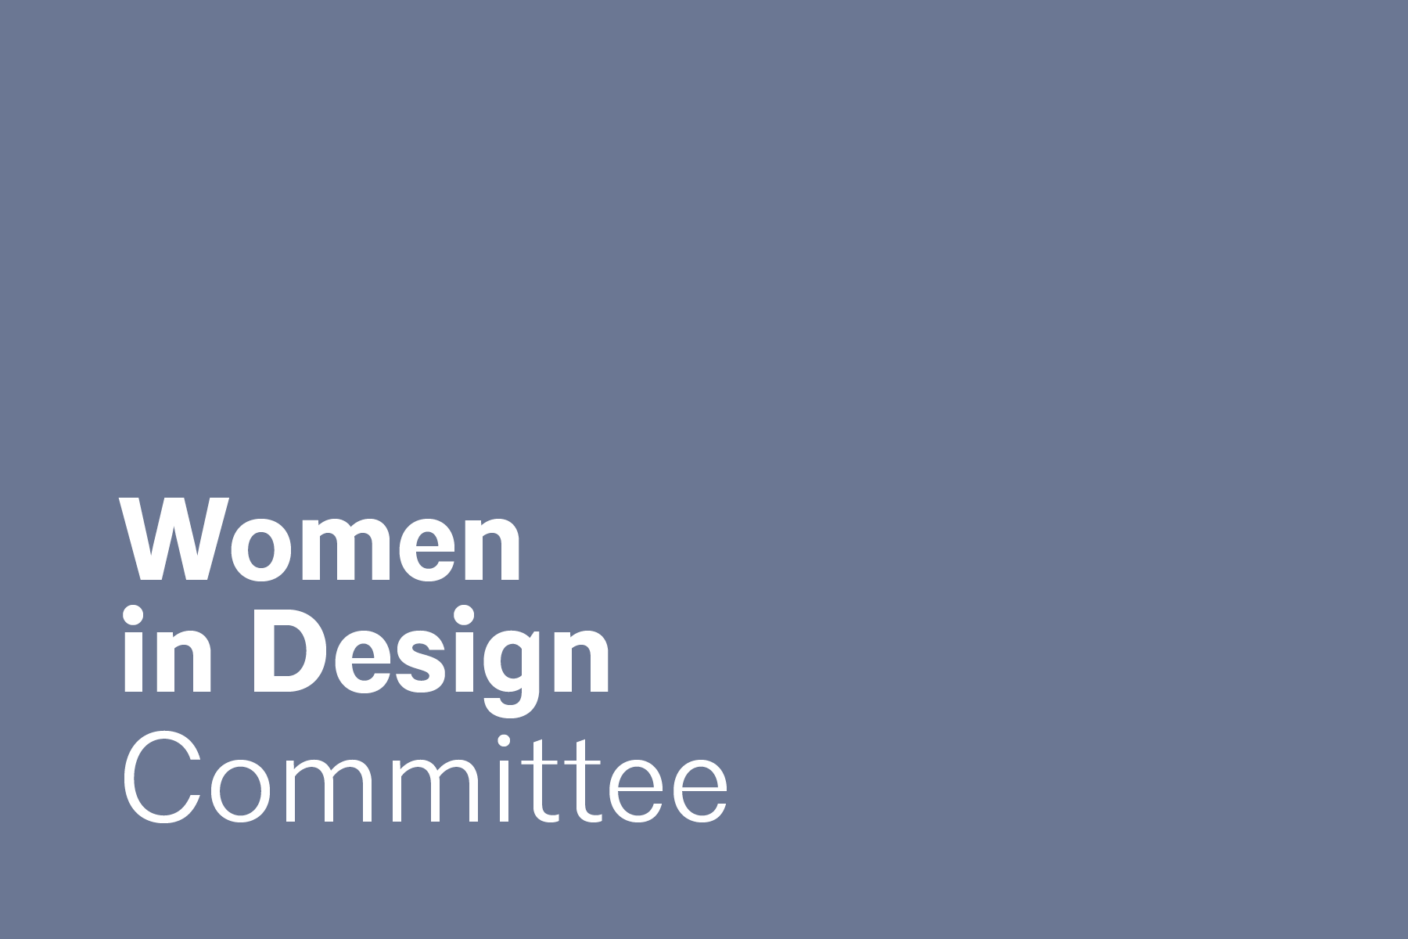 The Women in Design Committee celebrates women in the design professions and supports their professional development and leadership growth by providing a forum for thoughtful discussion and networking. We seek to raise the awareness and understanding of the current state of gender diversity and elevate the influence of women leaders in our profession.